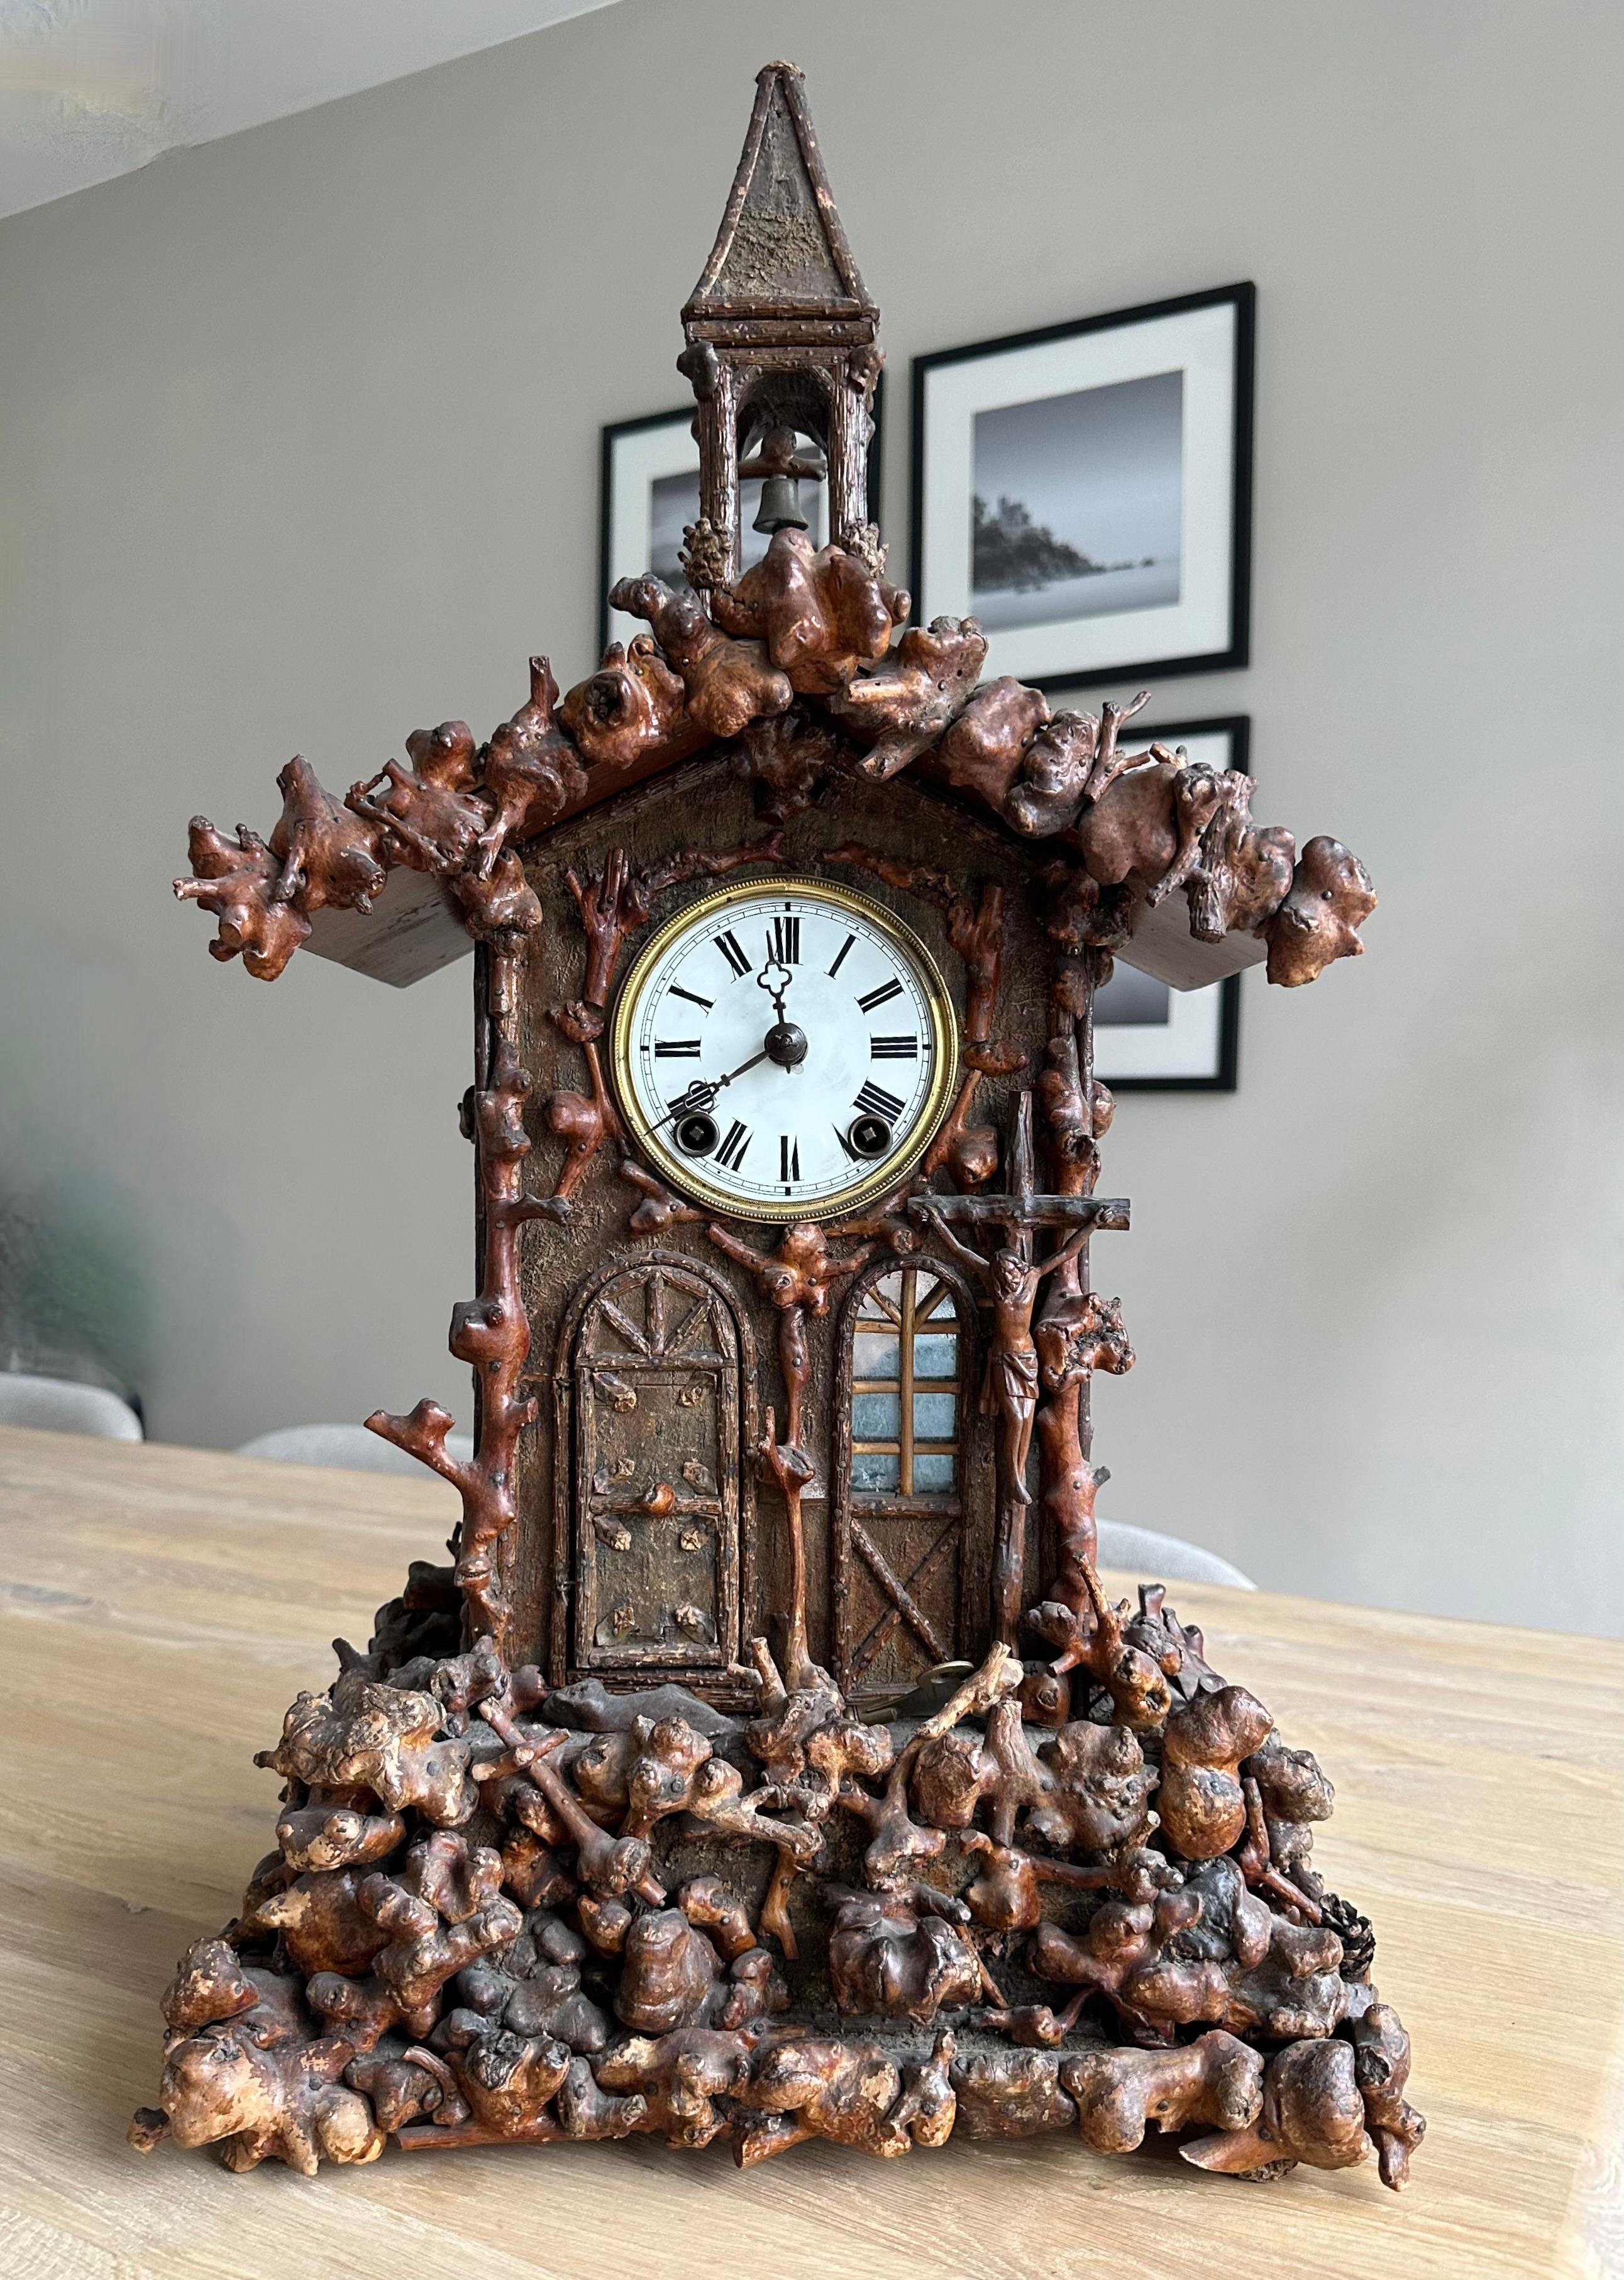 Rare and great folk-art workmanship mantel clock for the collectors and enthousiasts.

Over the years we have had the pleasure of owning and selling a number of beautiful Black Forest antiques, but never did we come accross a 19th century Black